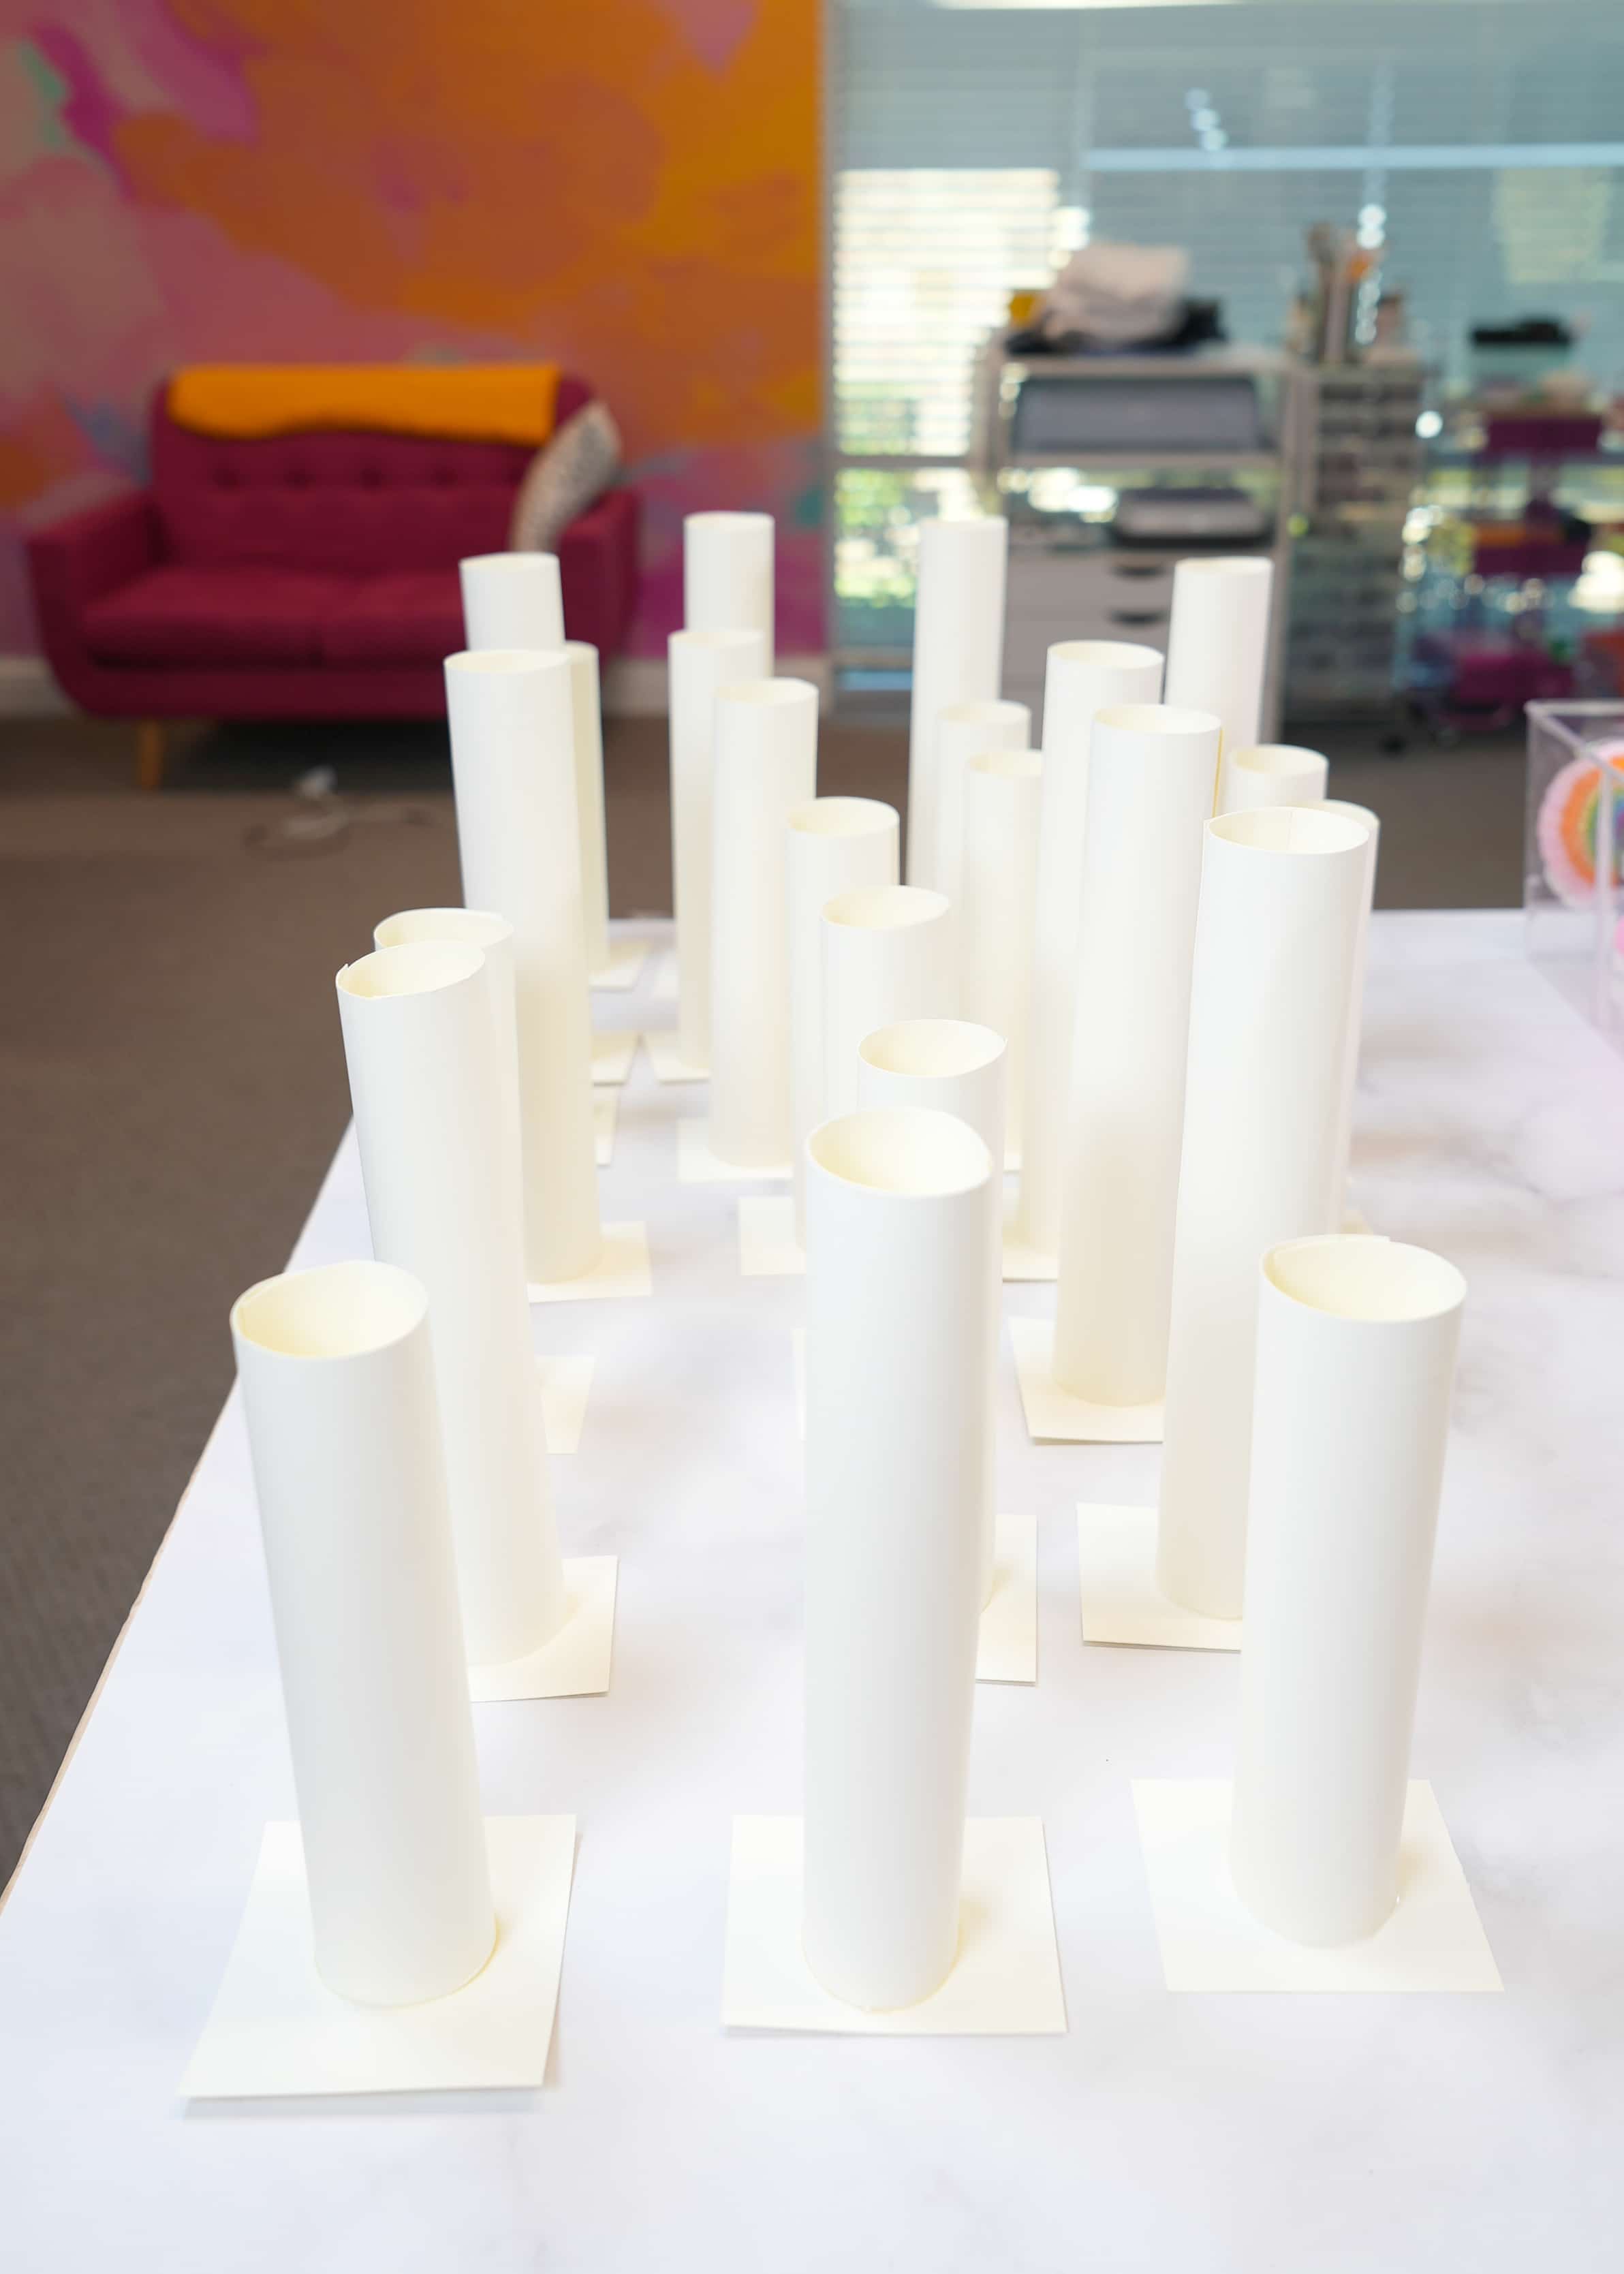 Tubes of paper sitting on top of square paper bases